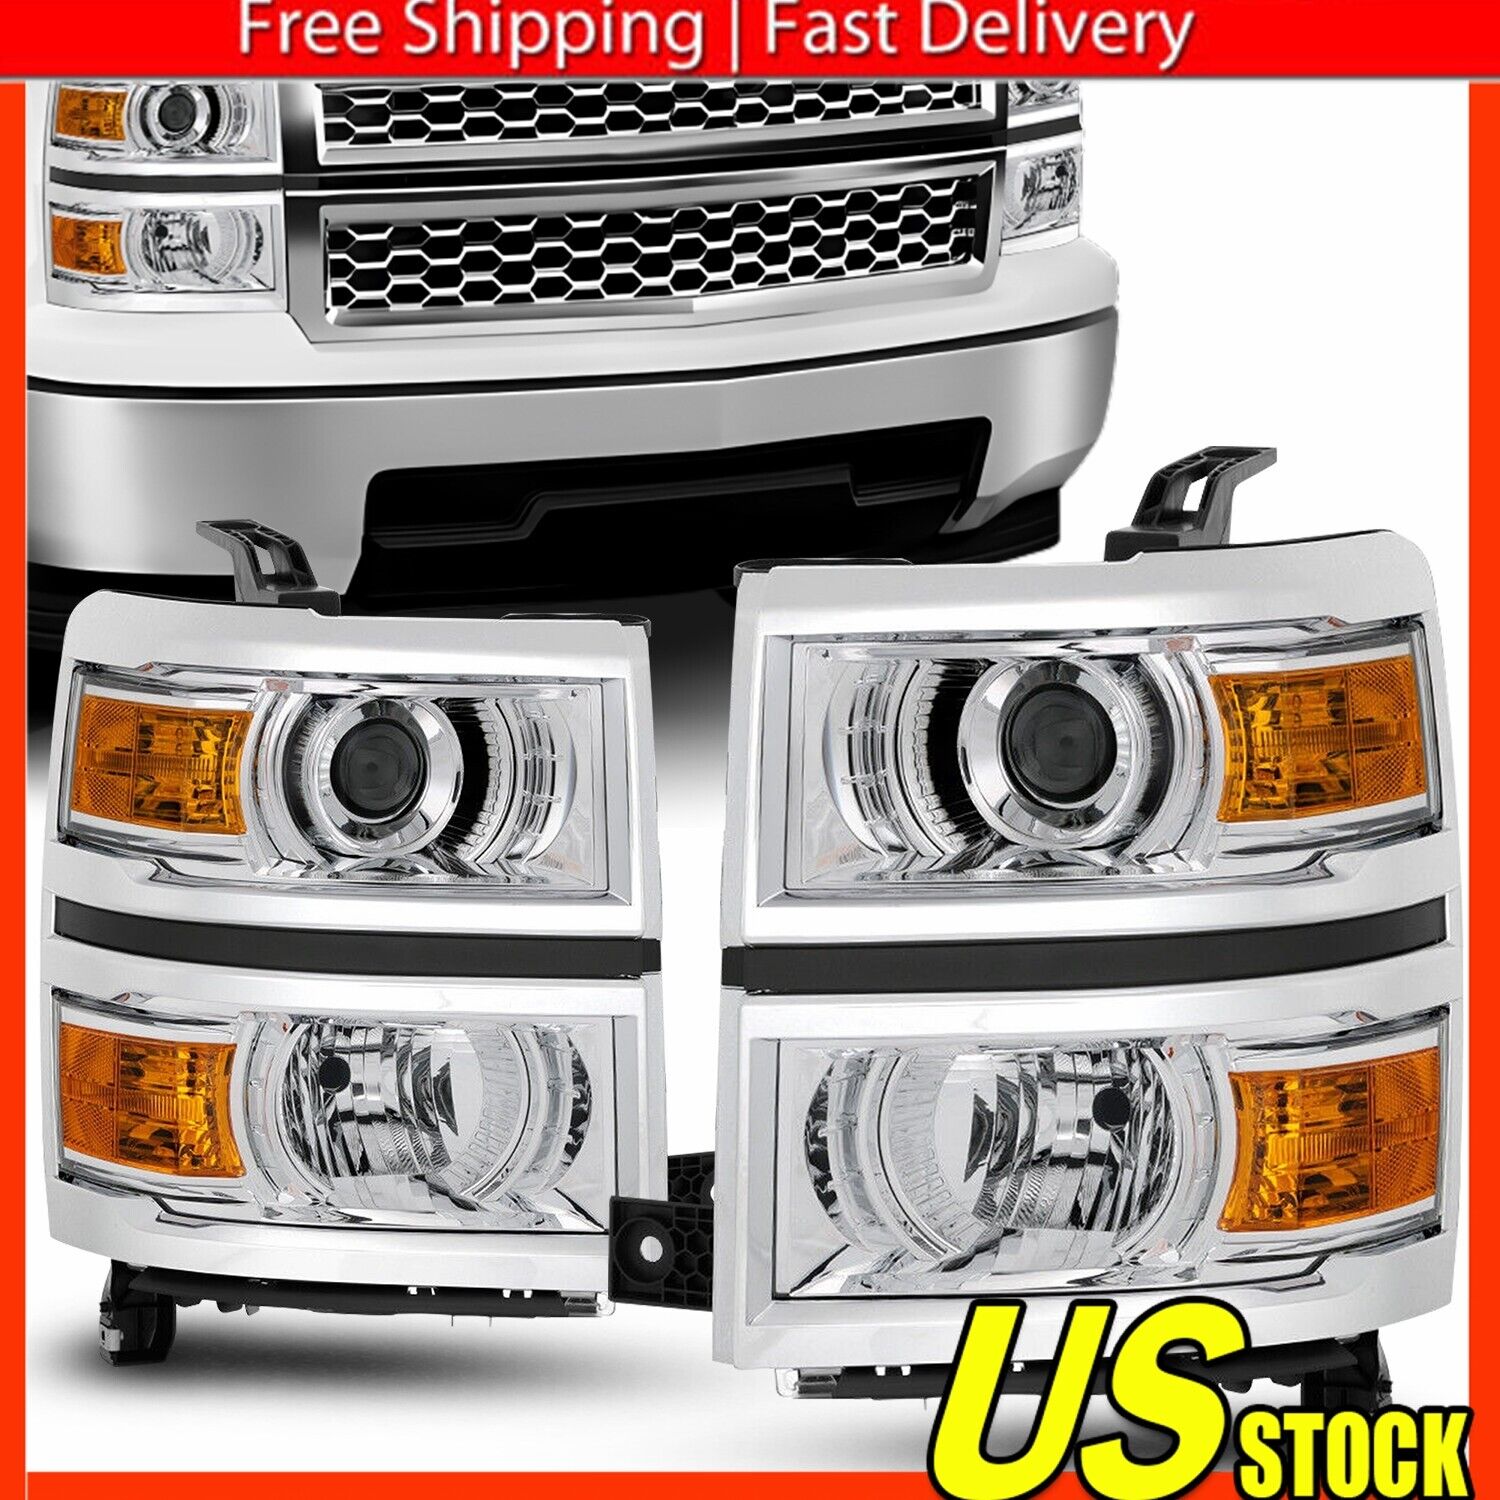 Pair For 2014-15 Chevy Silverado 1500 Projector Headlight Assembly Chrome EOOH G